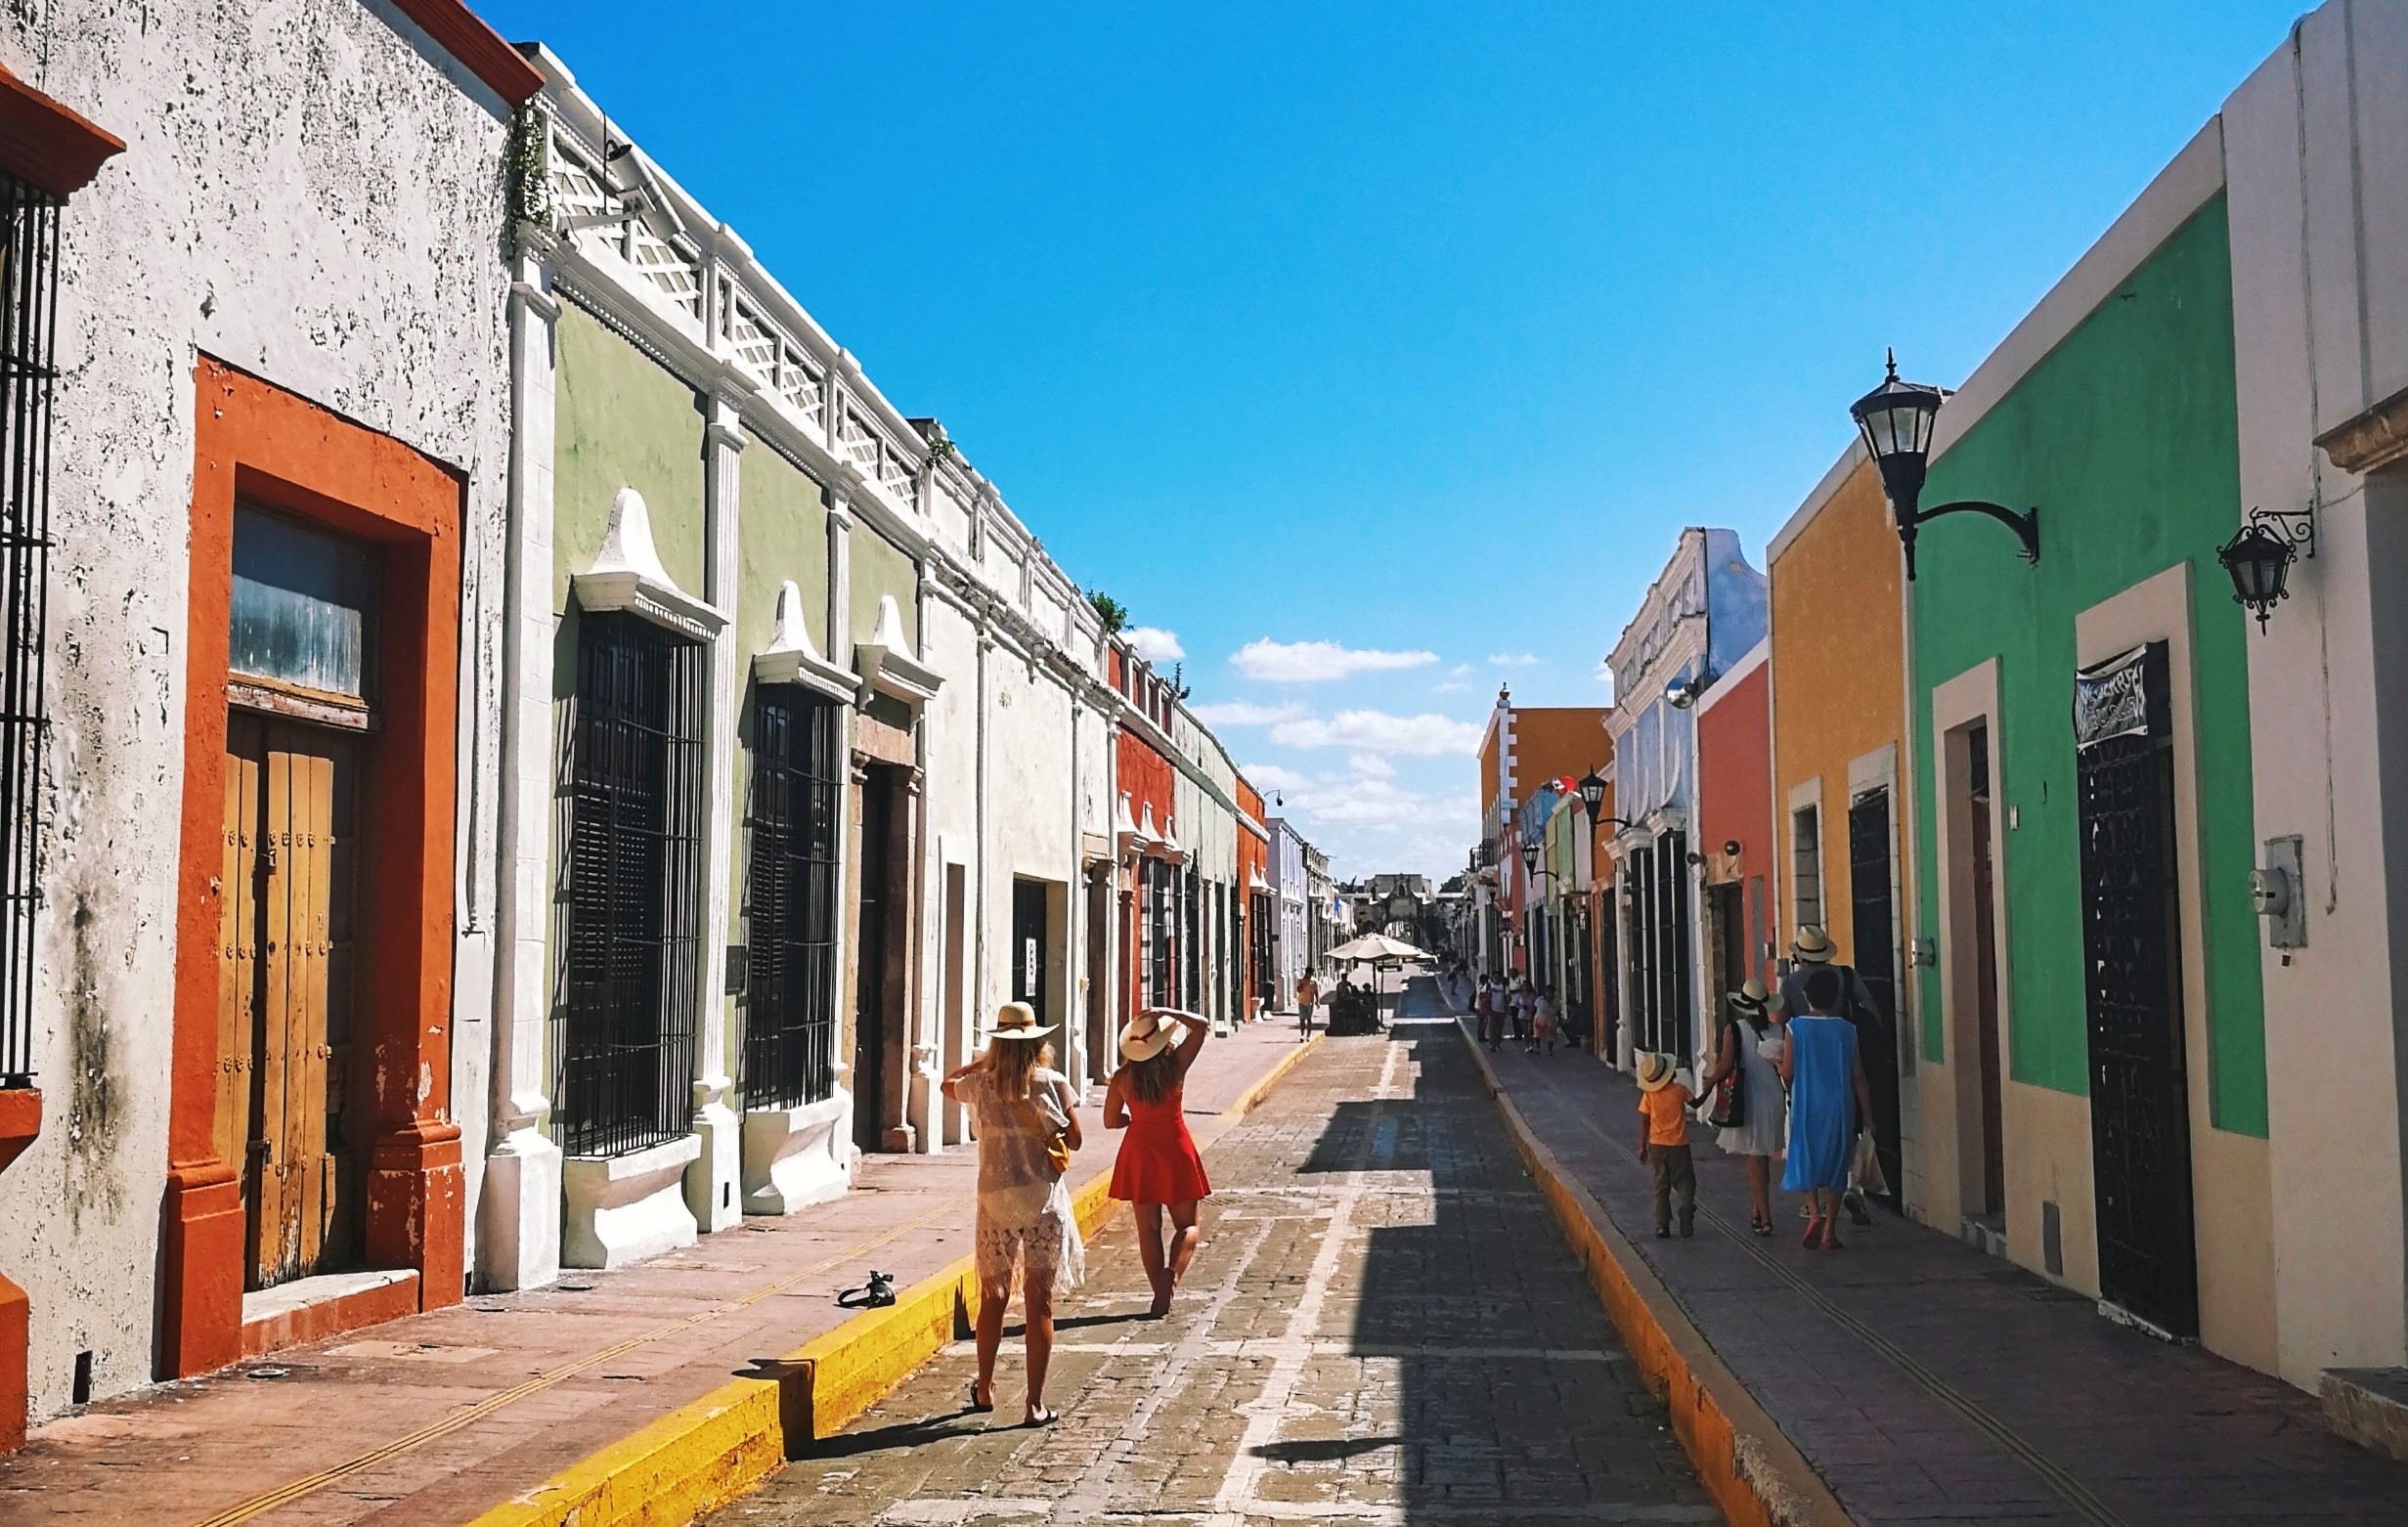 Day 09: Campeche